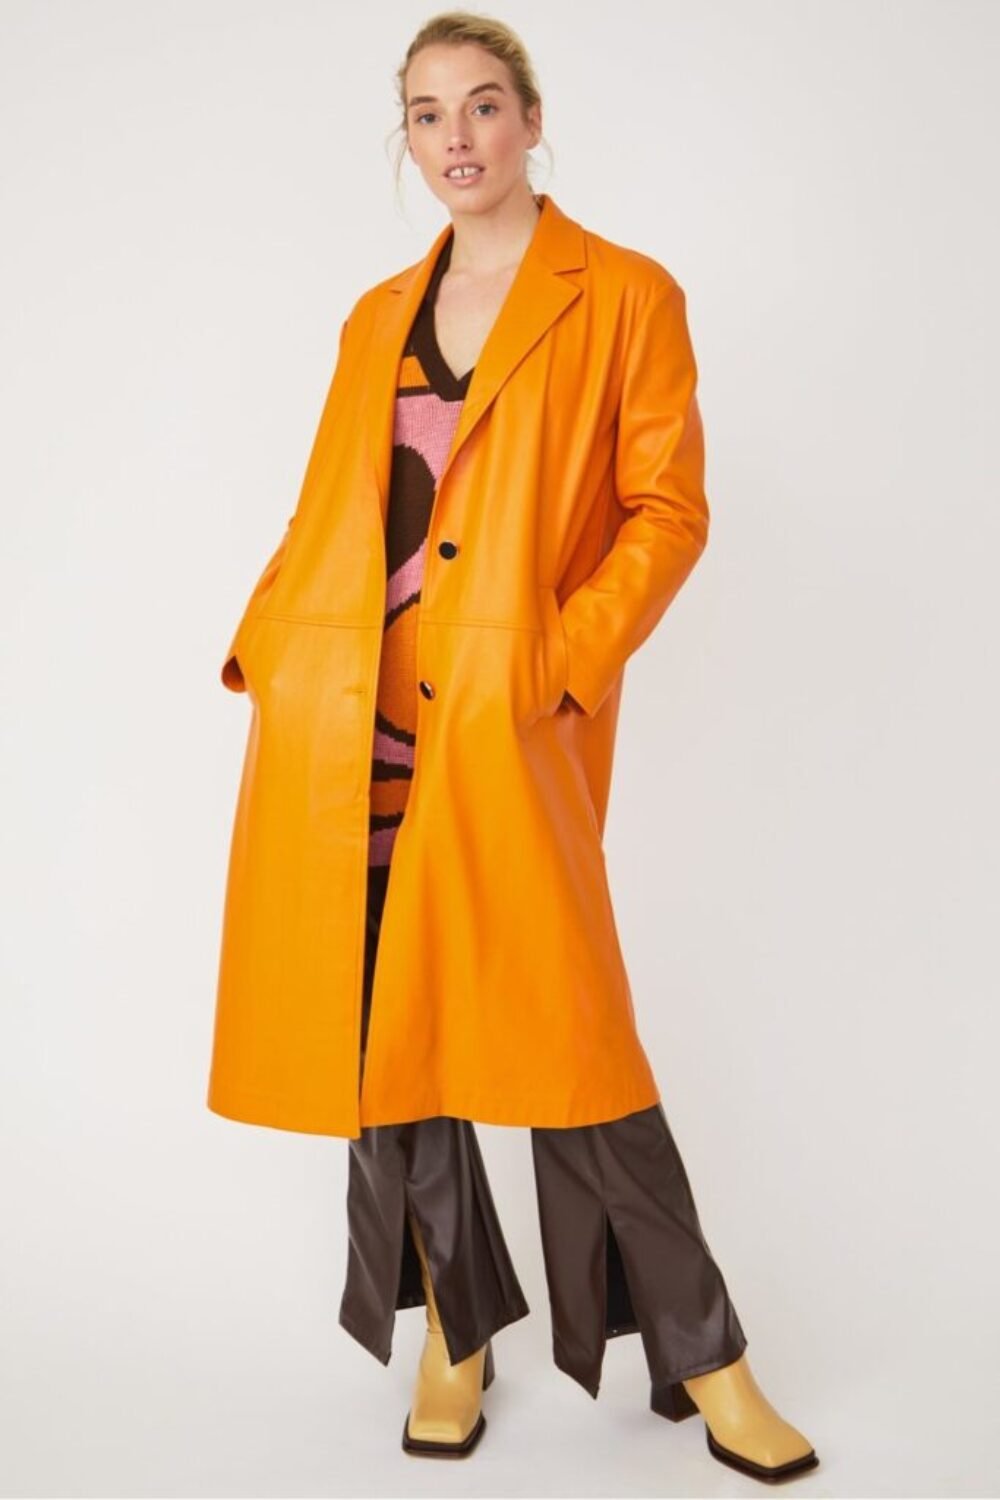 Shop Lux Orange Eco Leather Trench Coat and women's luxury and designer clothes at www.lux-apparel.co.uk